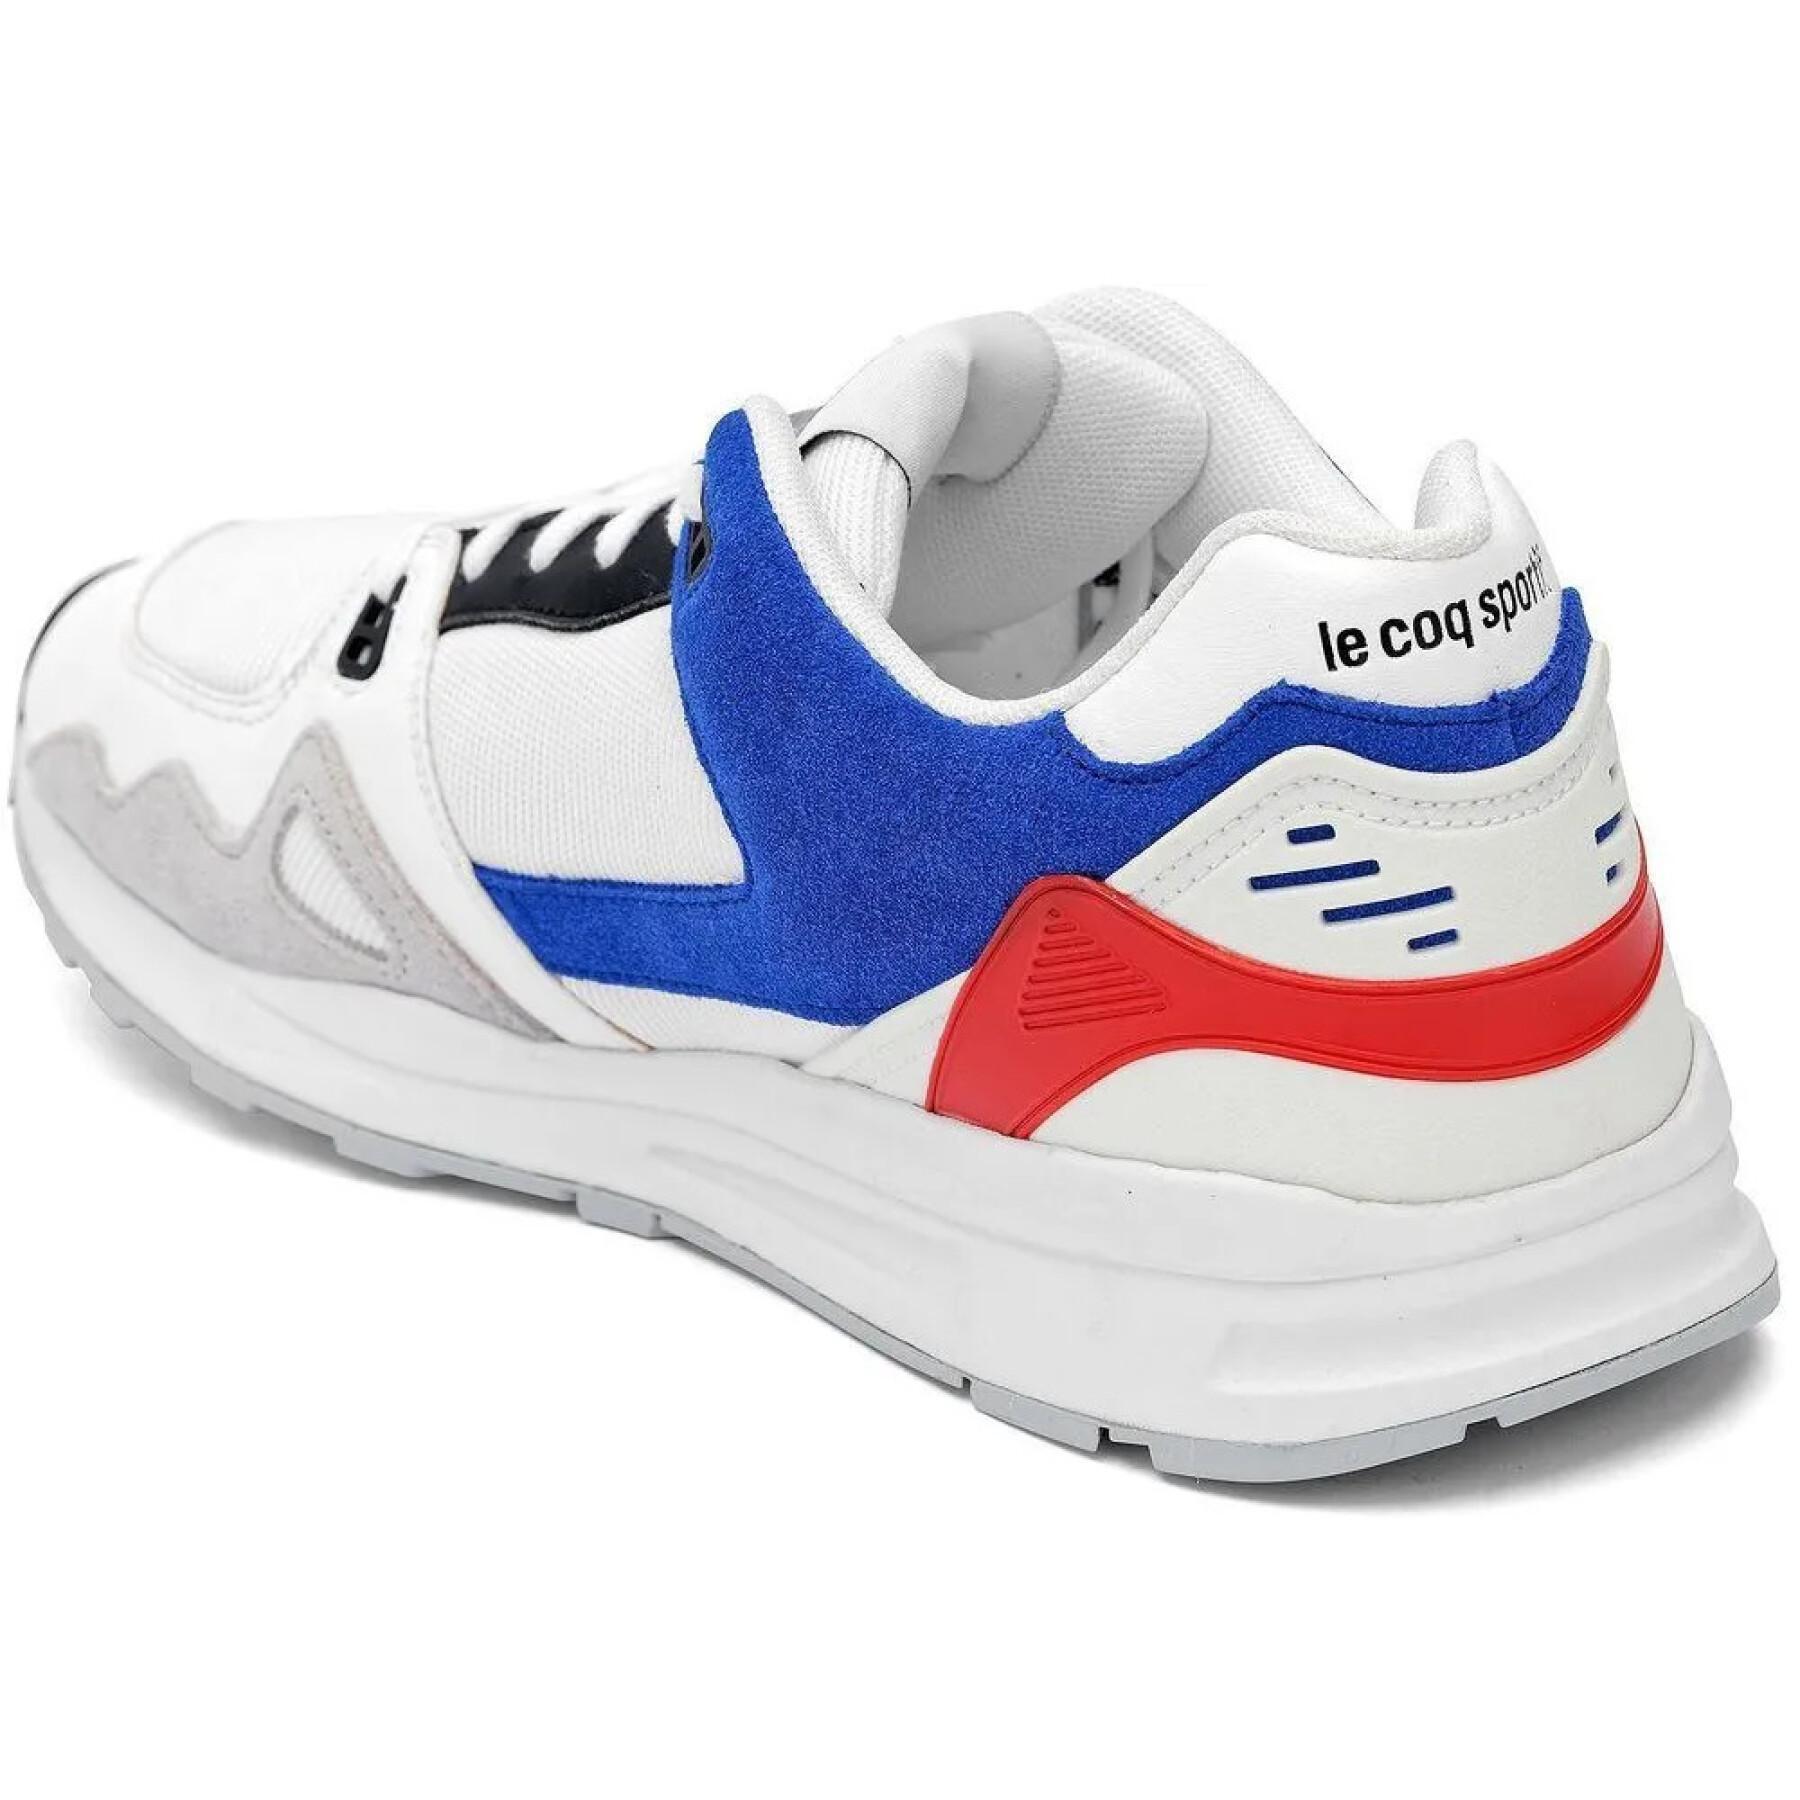 Trainers Le Coq Sportif LCS R1000 optical